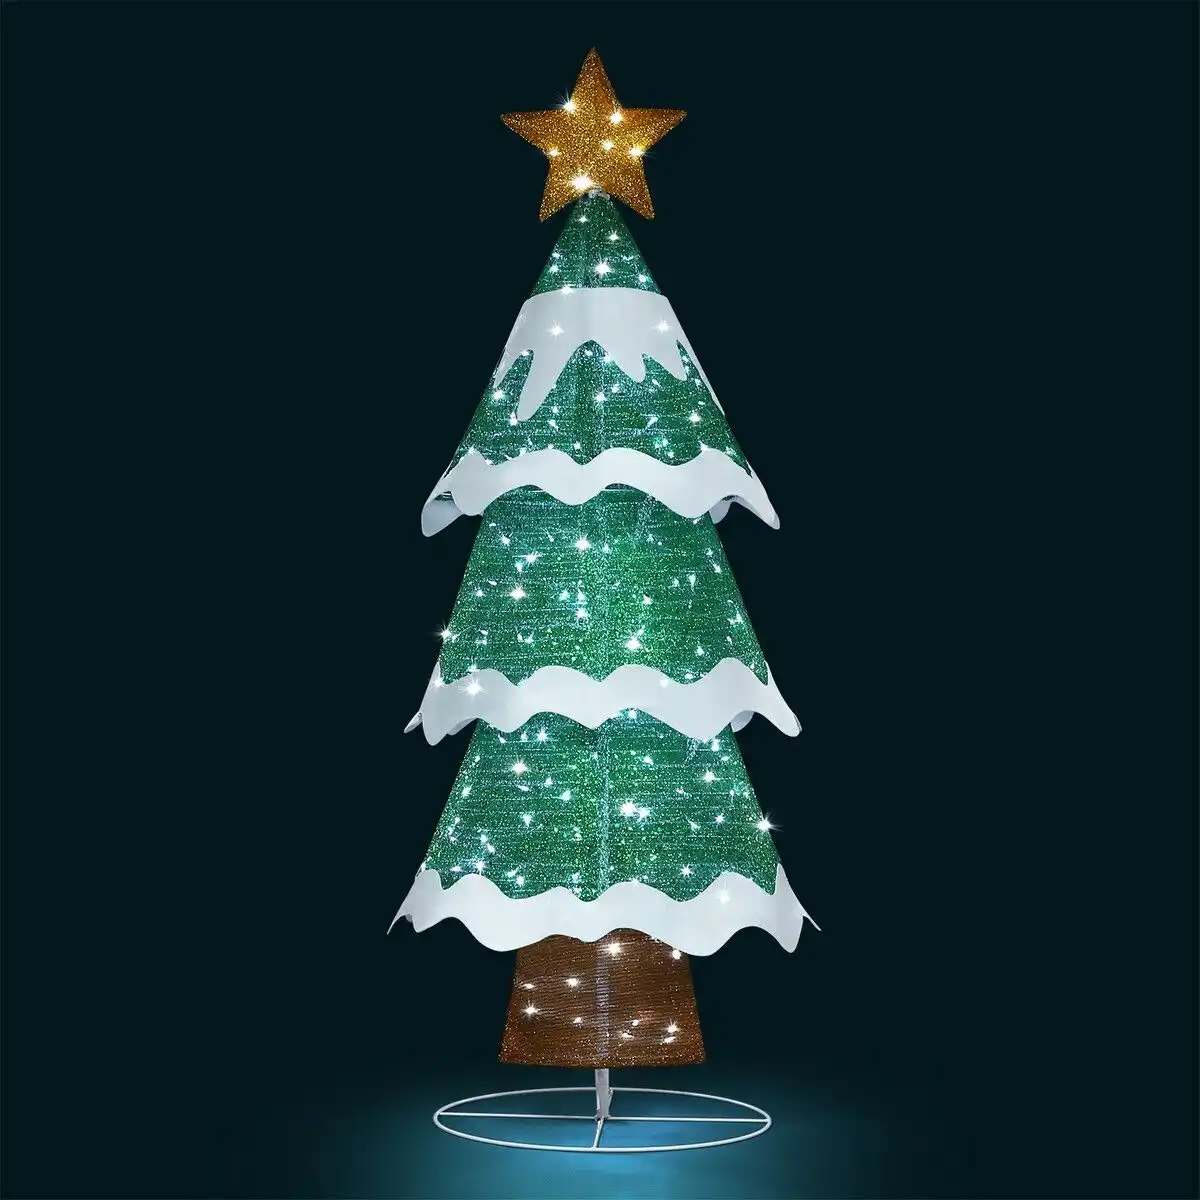 Solight 180cm Christmas Tree Decoration LED Strip Light Home Display Xmas Outdoor Holiday Ornaments Folding 3 Tiers 8 Flickering Effects Star Topper